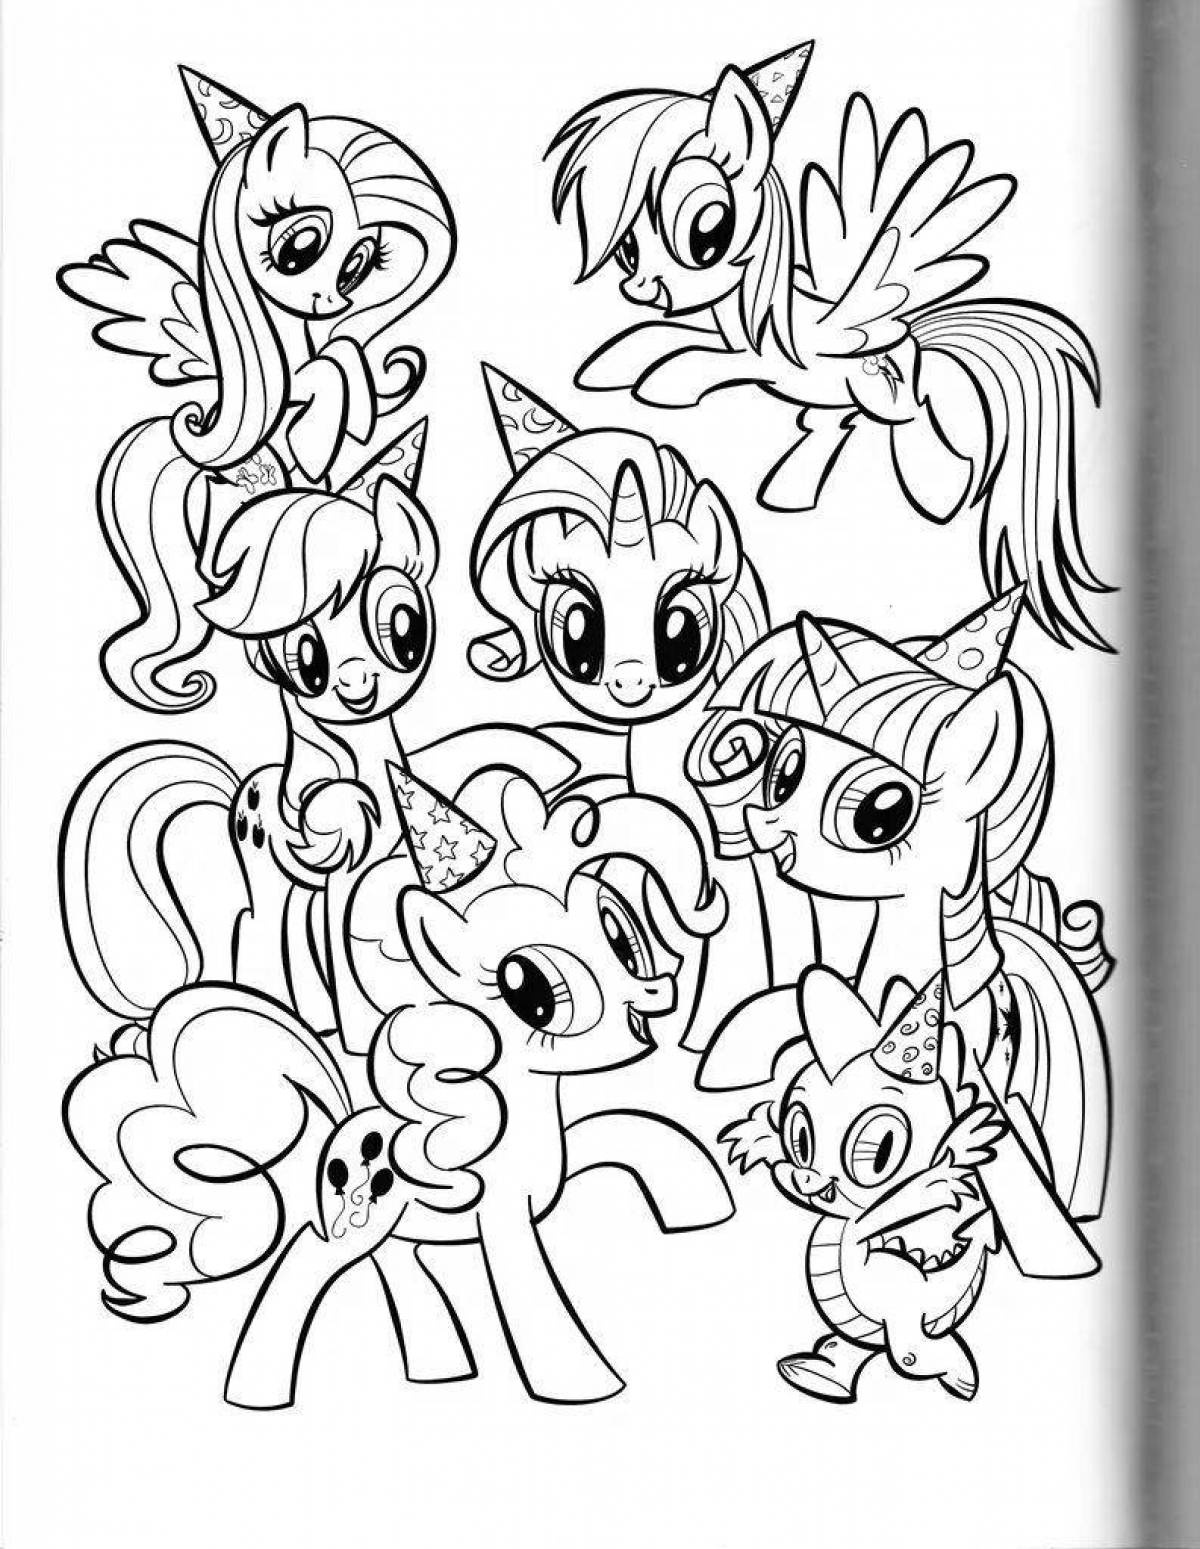 Sparkle coloring all ponies together